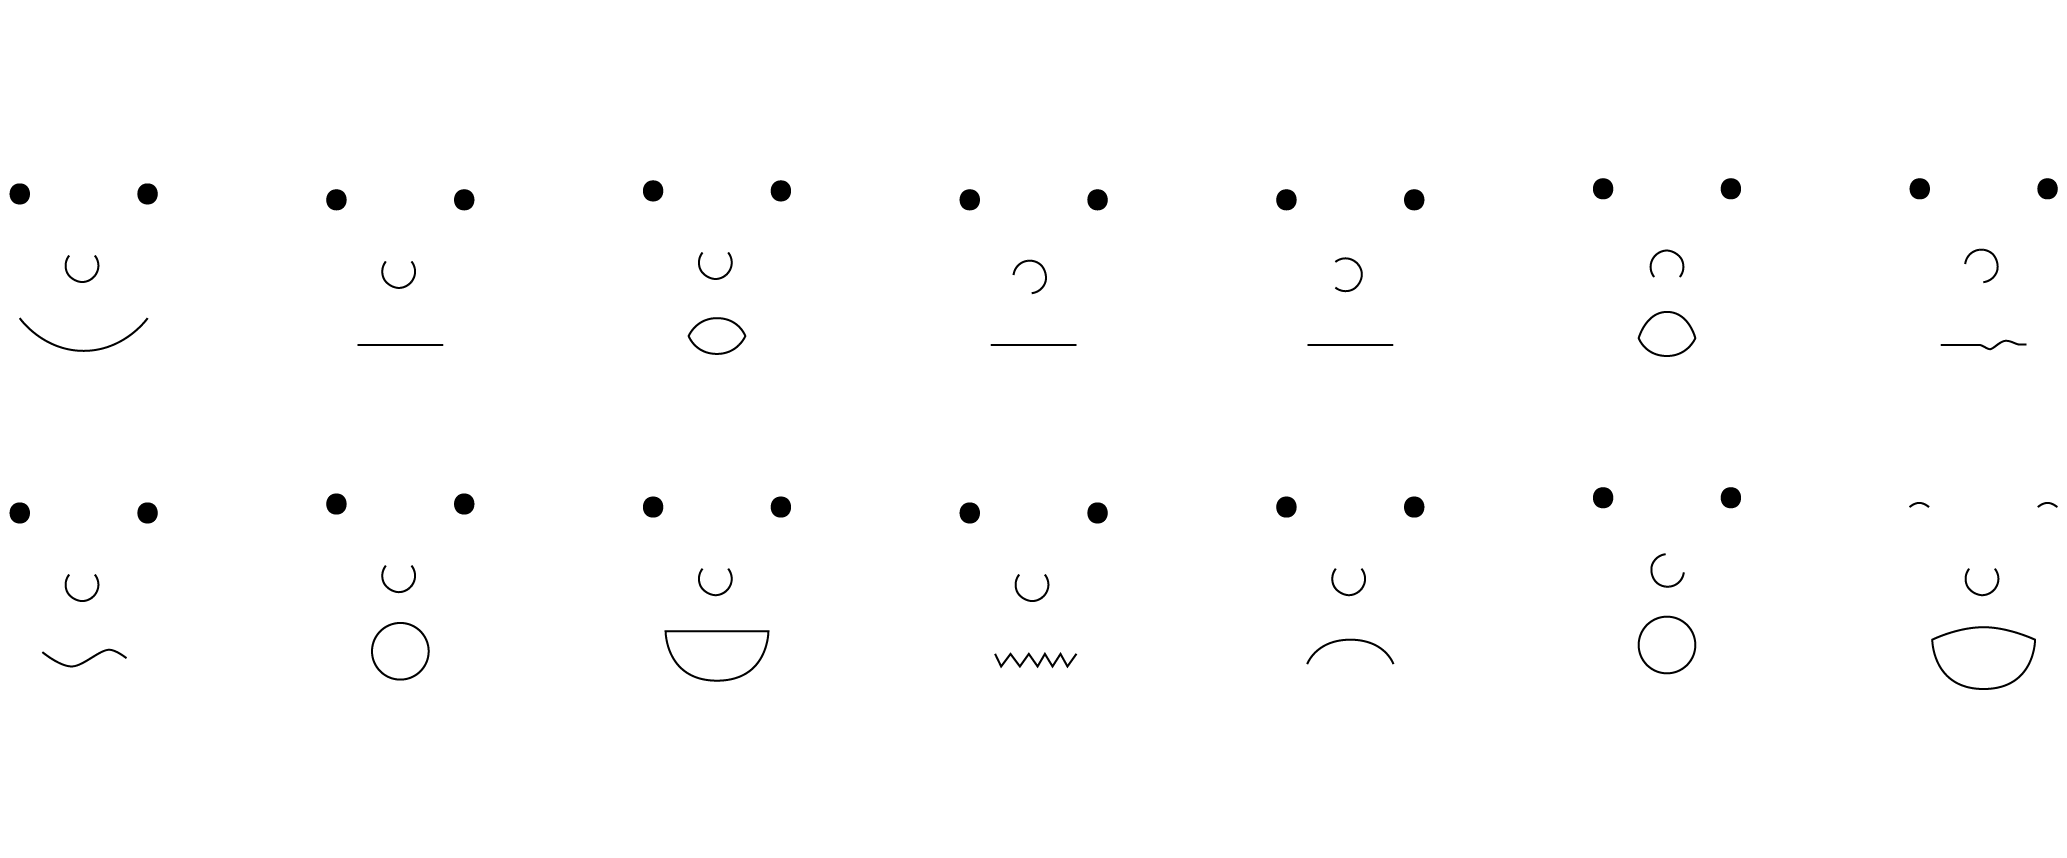 Illustration of all the facial expressions used in the animation.